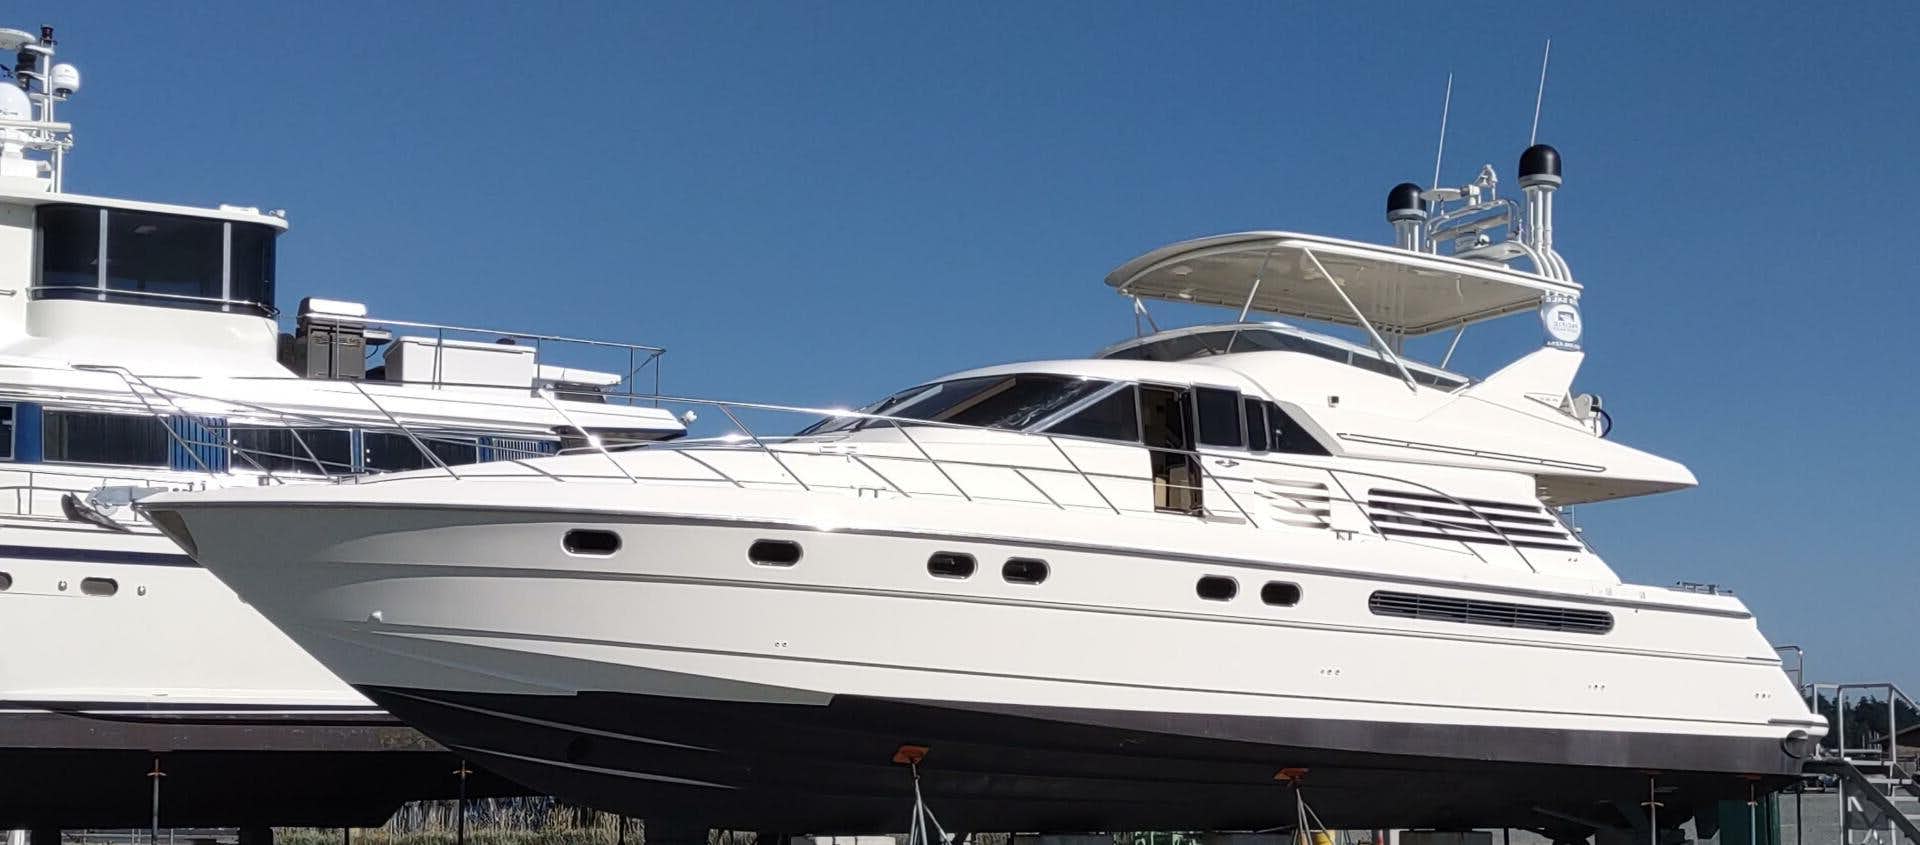 F66
Yacht for Sale